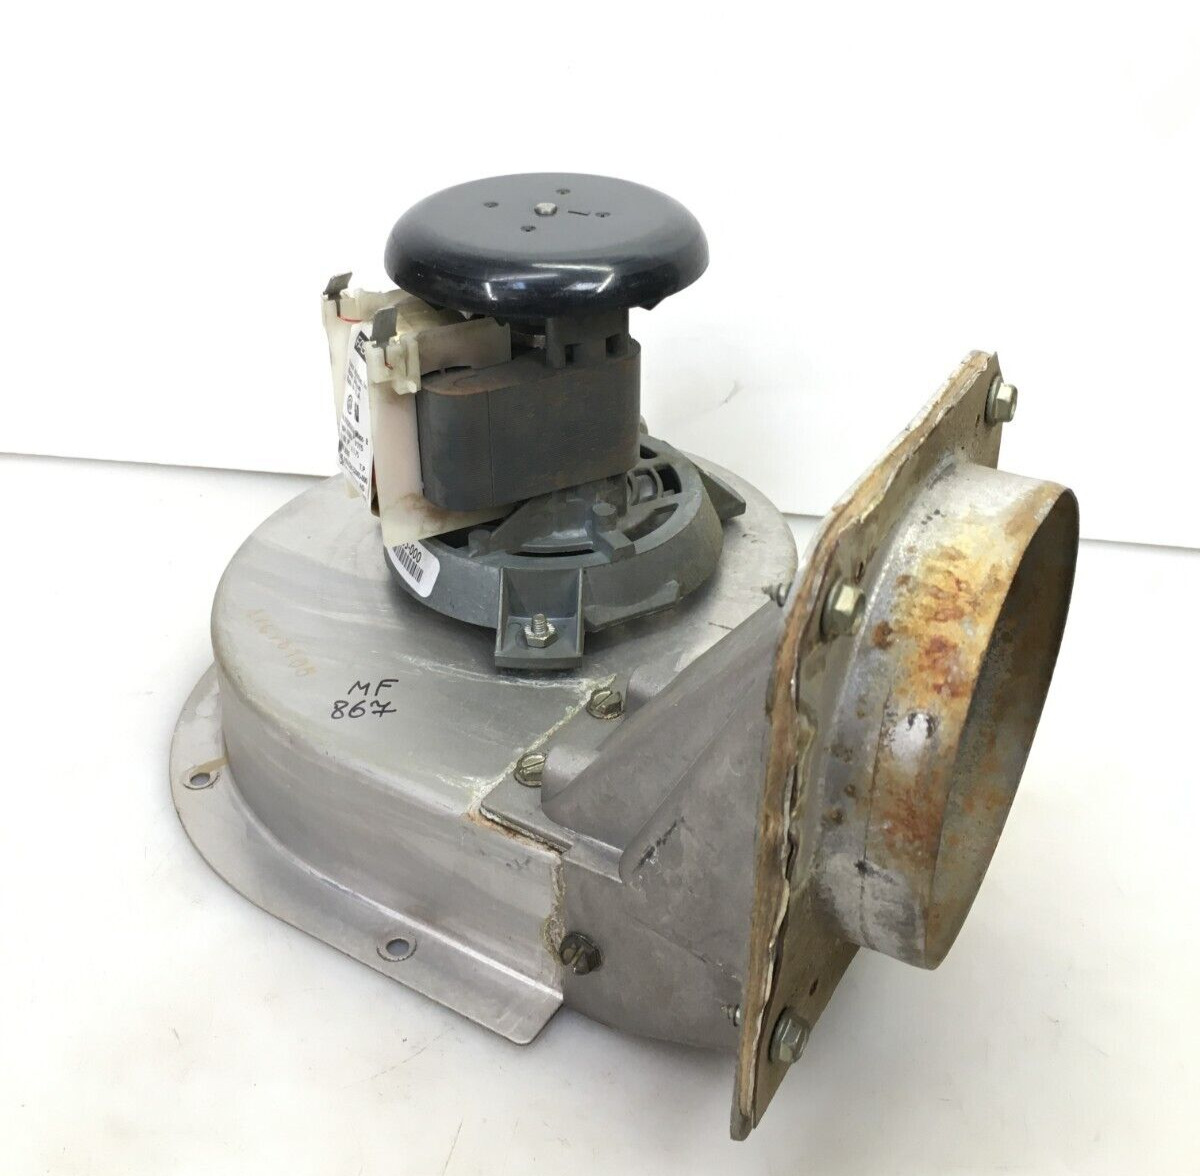 FASCO 7058-0267 Draft Inducer Blower Motor Assembly 024-32085-000 used #MF867